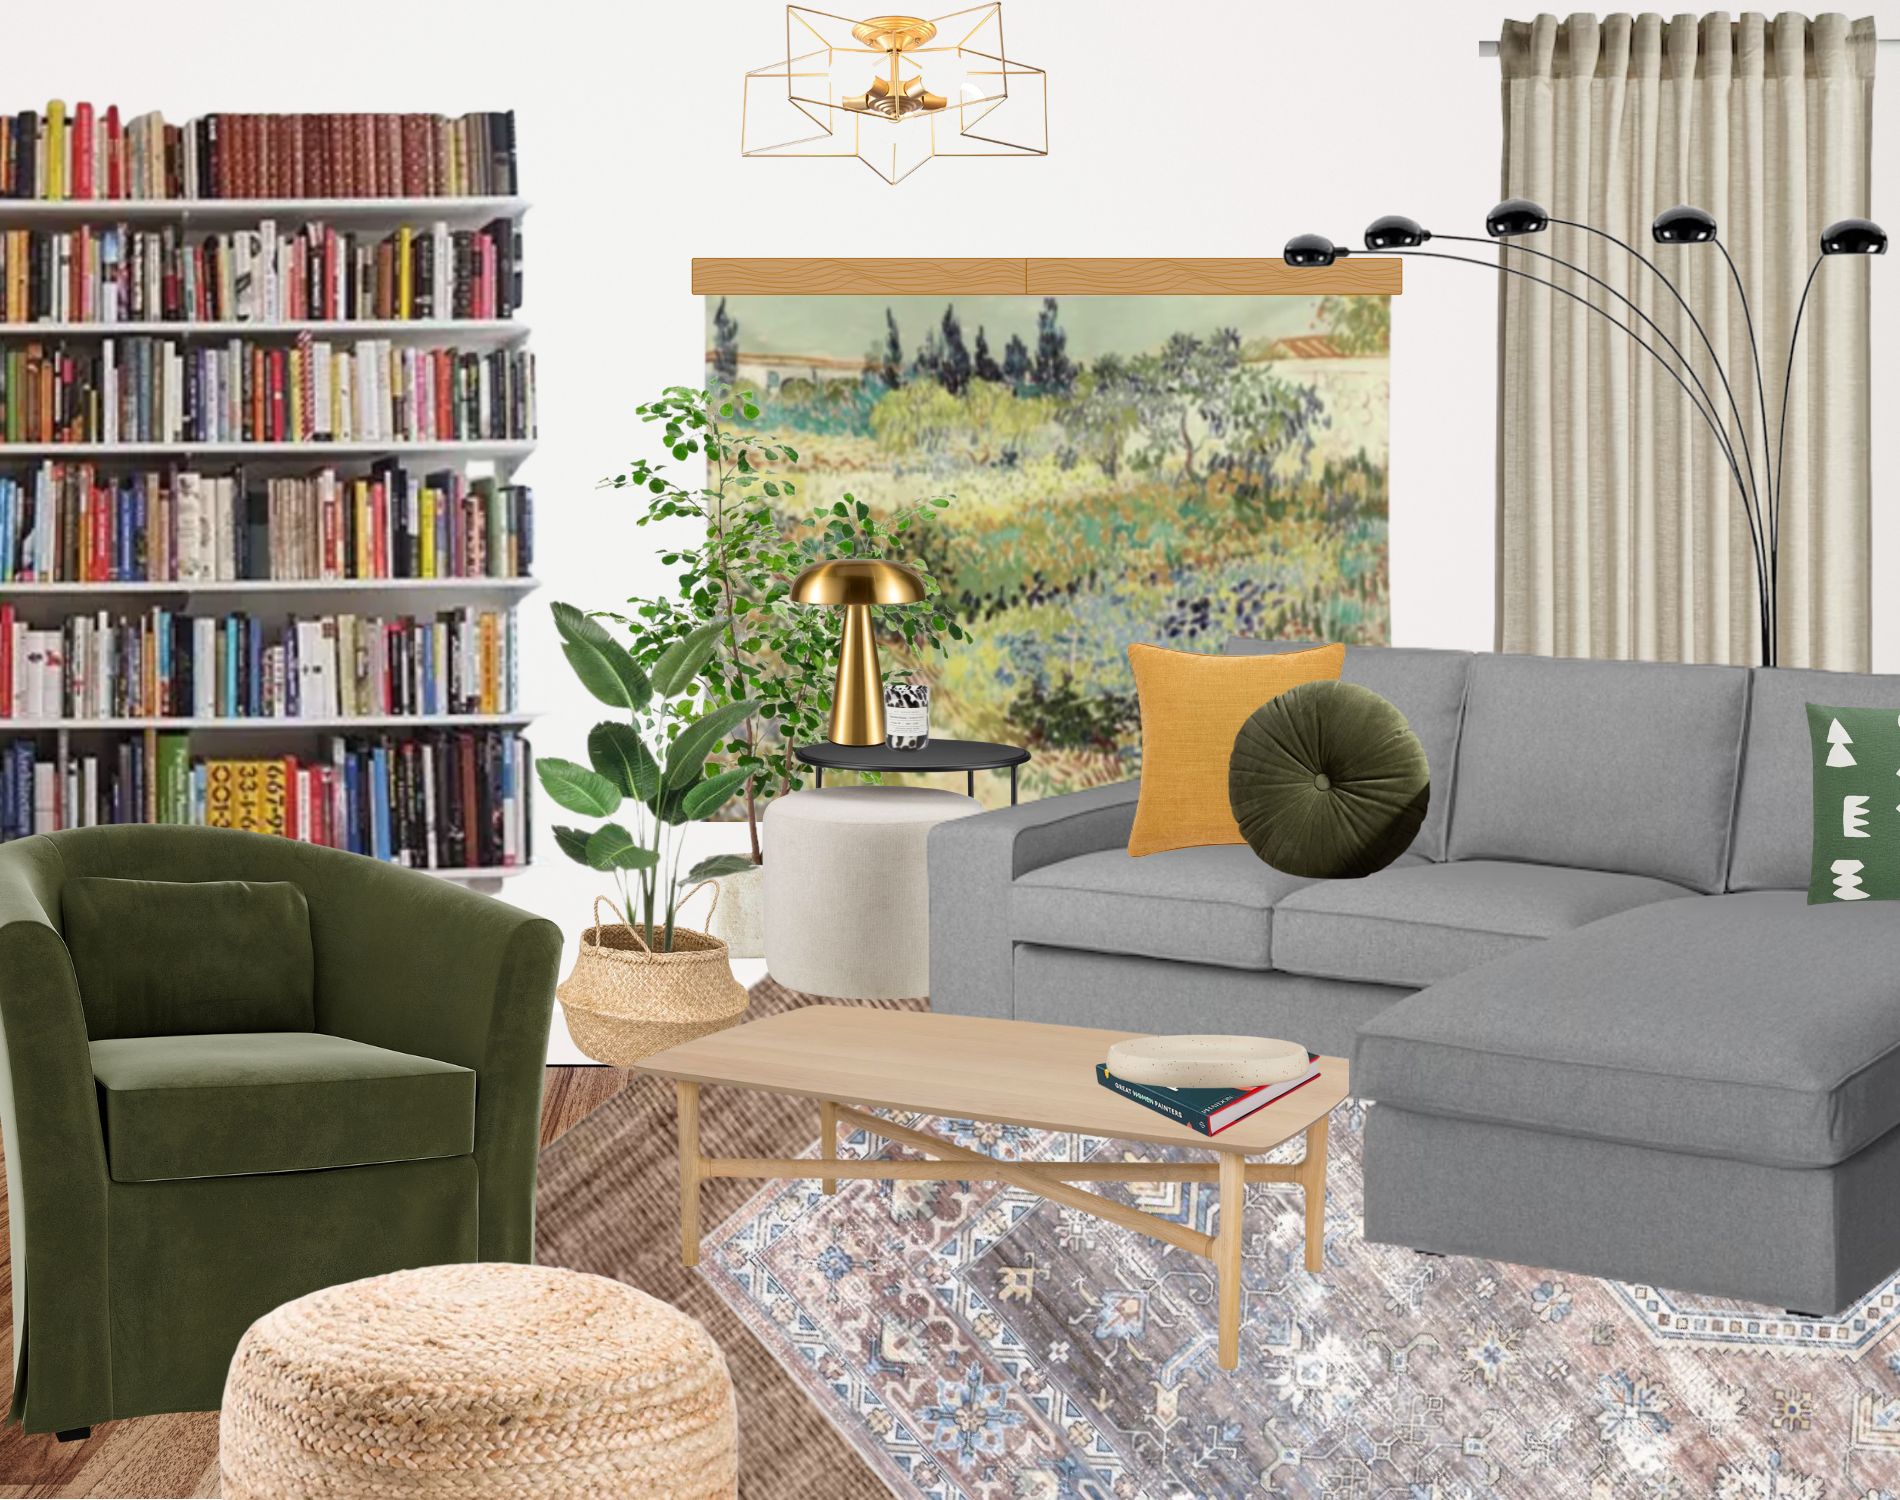 Living Room design board with grey couch, green chair and bookshelf with layered lighting